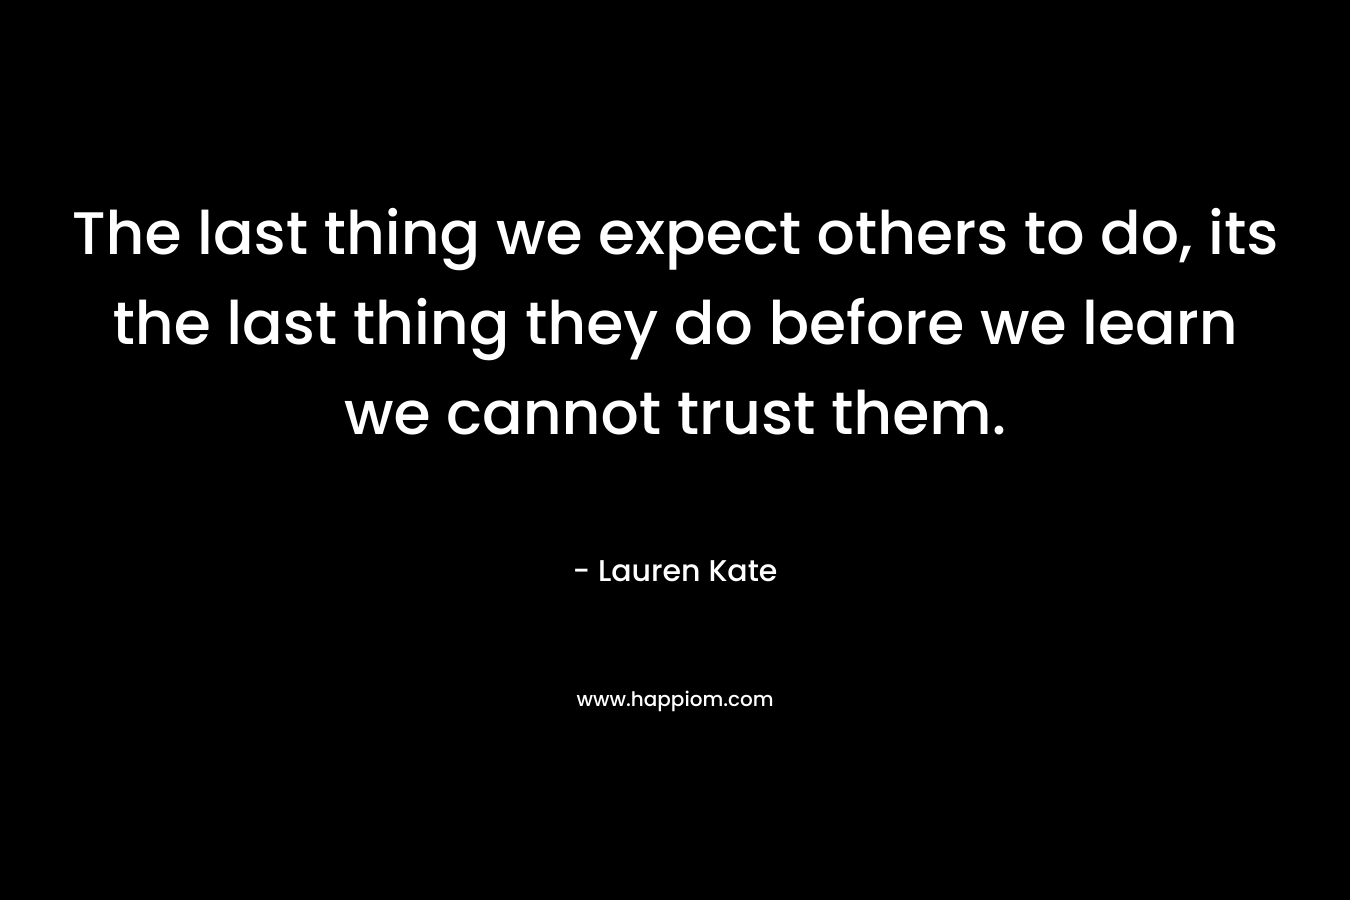 The last thing we expect others to do, its the last thing they do before we learn we cannot trust them.